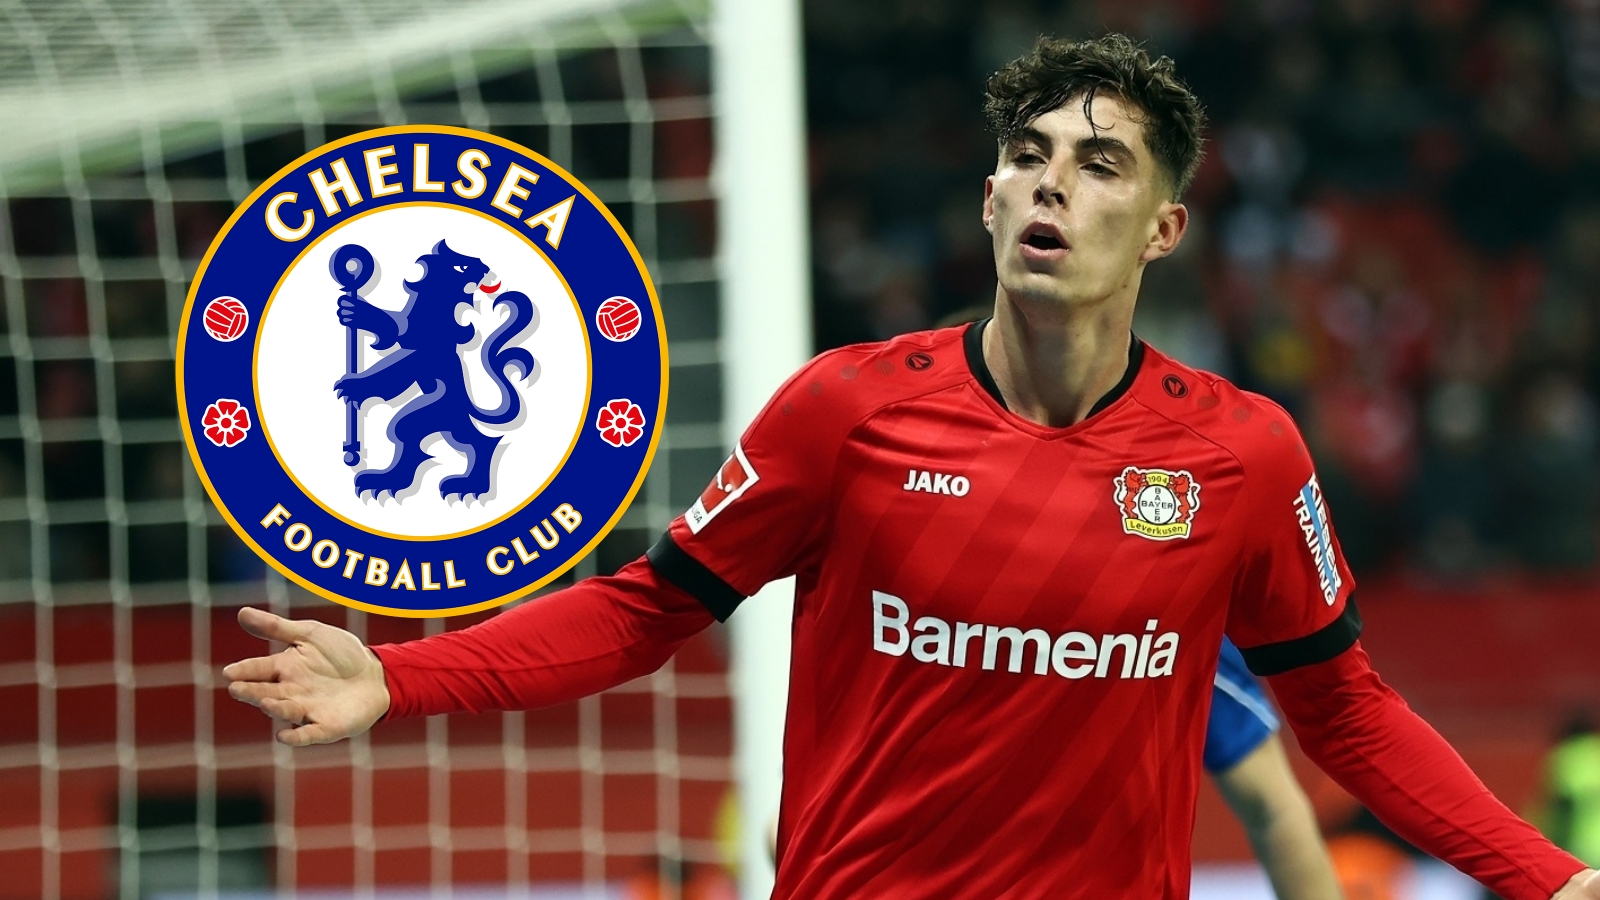 Signed sealed and delivered, Kai Havertz from Bayer Leverkusen is the new face of Chelsea 